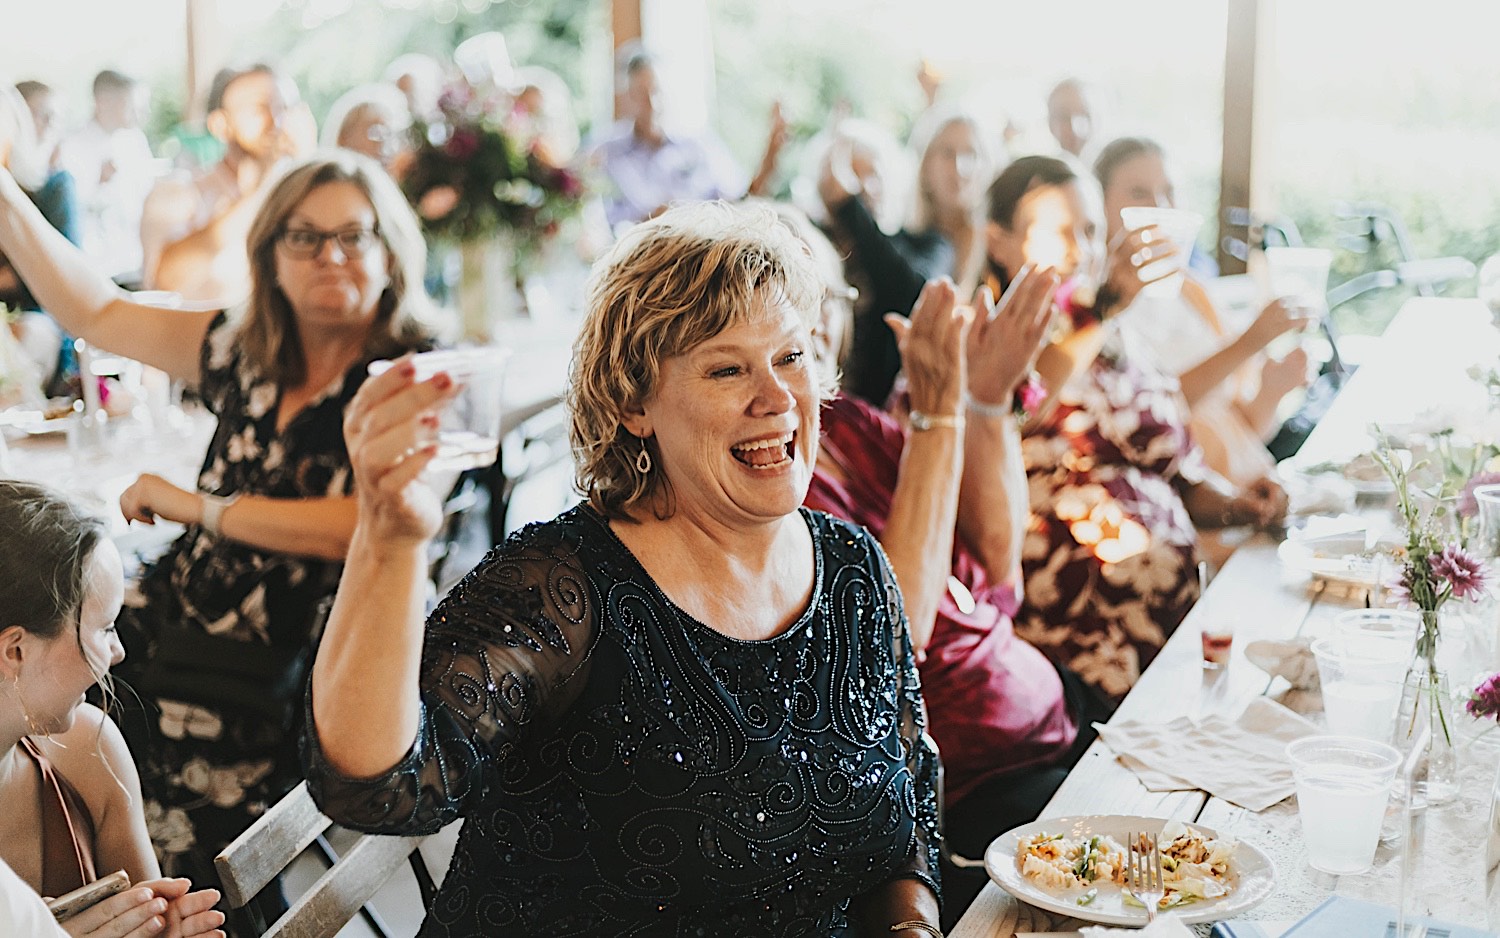 A woman cheers and raises a glass during a wedding reception at Legacy Hill Farm